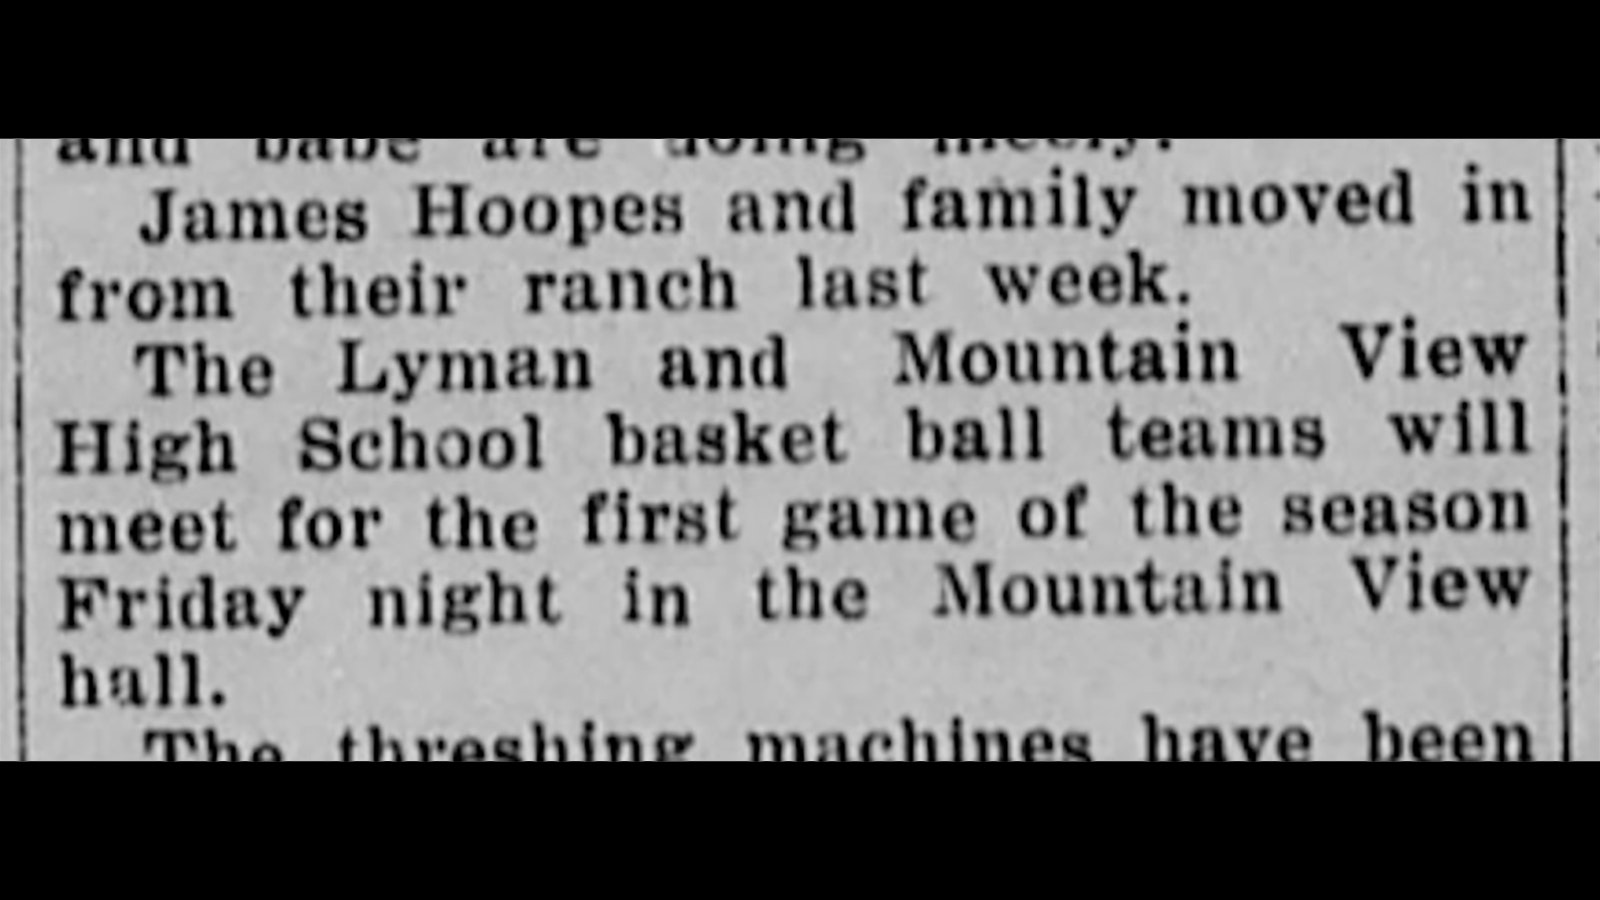 Lyman Enterprise chronicles one of the earliest games between the now-fierce rivals Lyman and Mountain View in 1922.